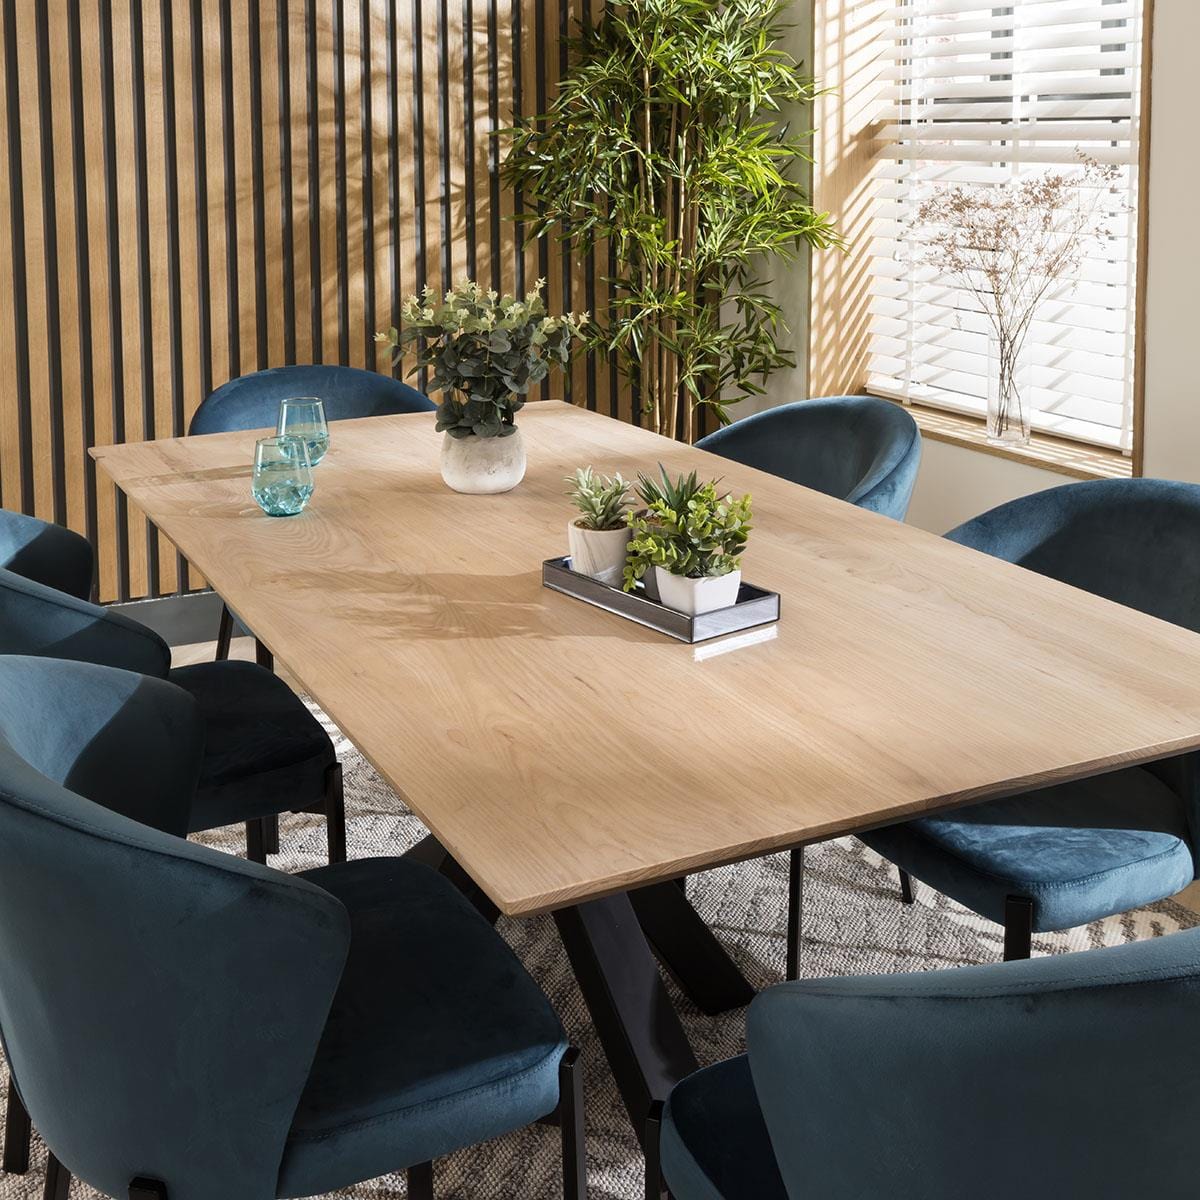 Quatropi Zoe Solid Natural 6 Seat Wooden Dining Table And Chairs Set Blue